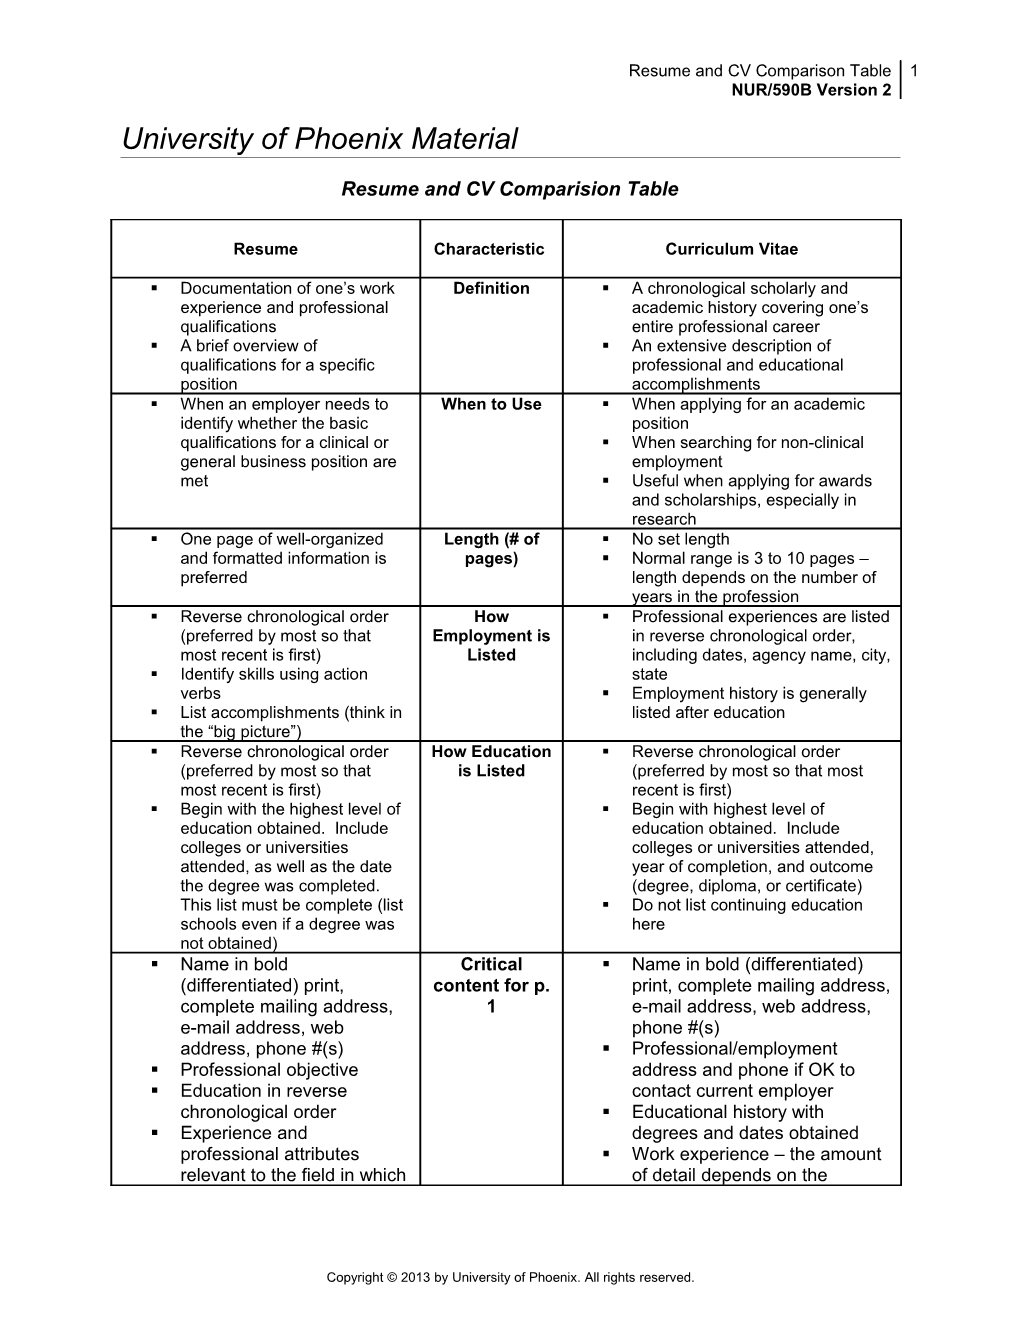 Resume and CV Comparision Table